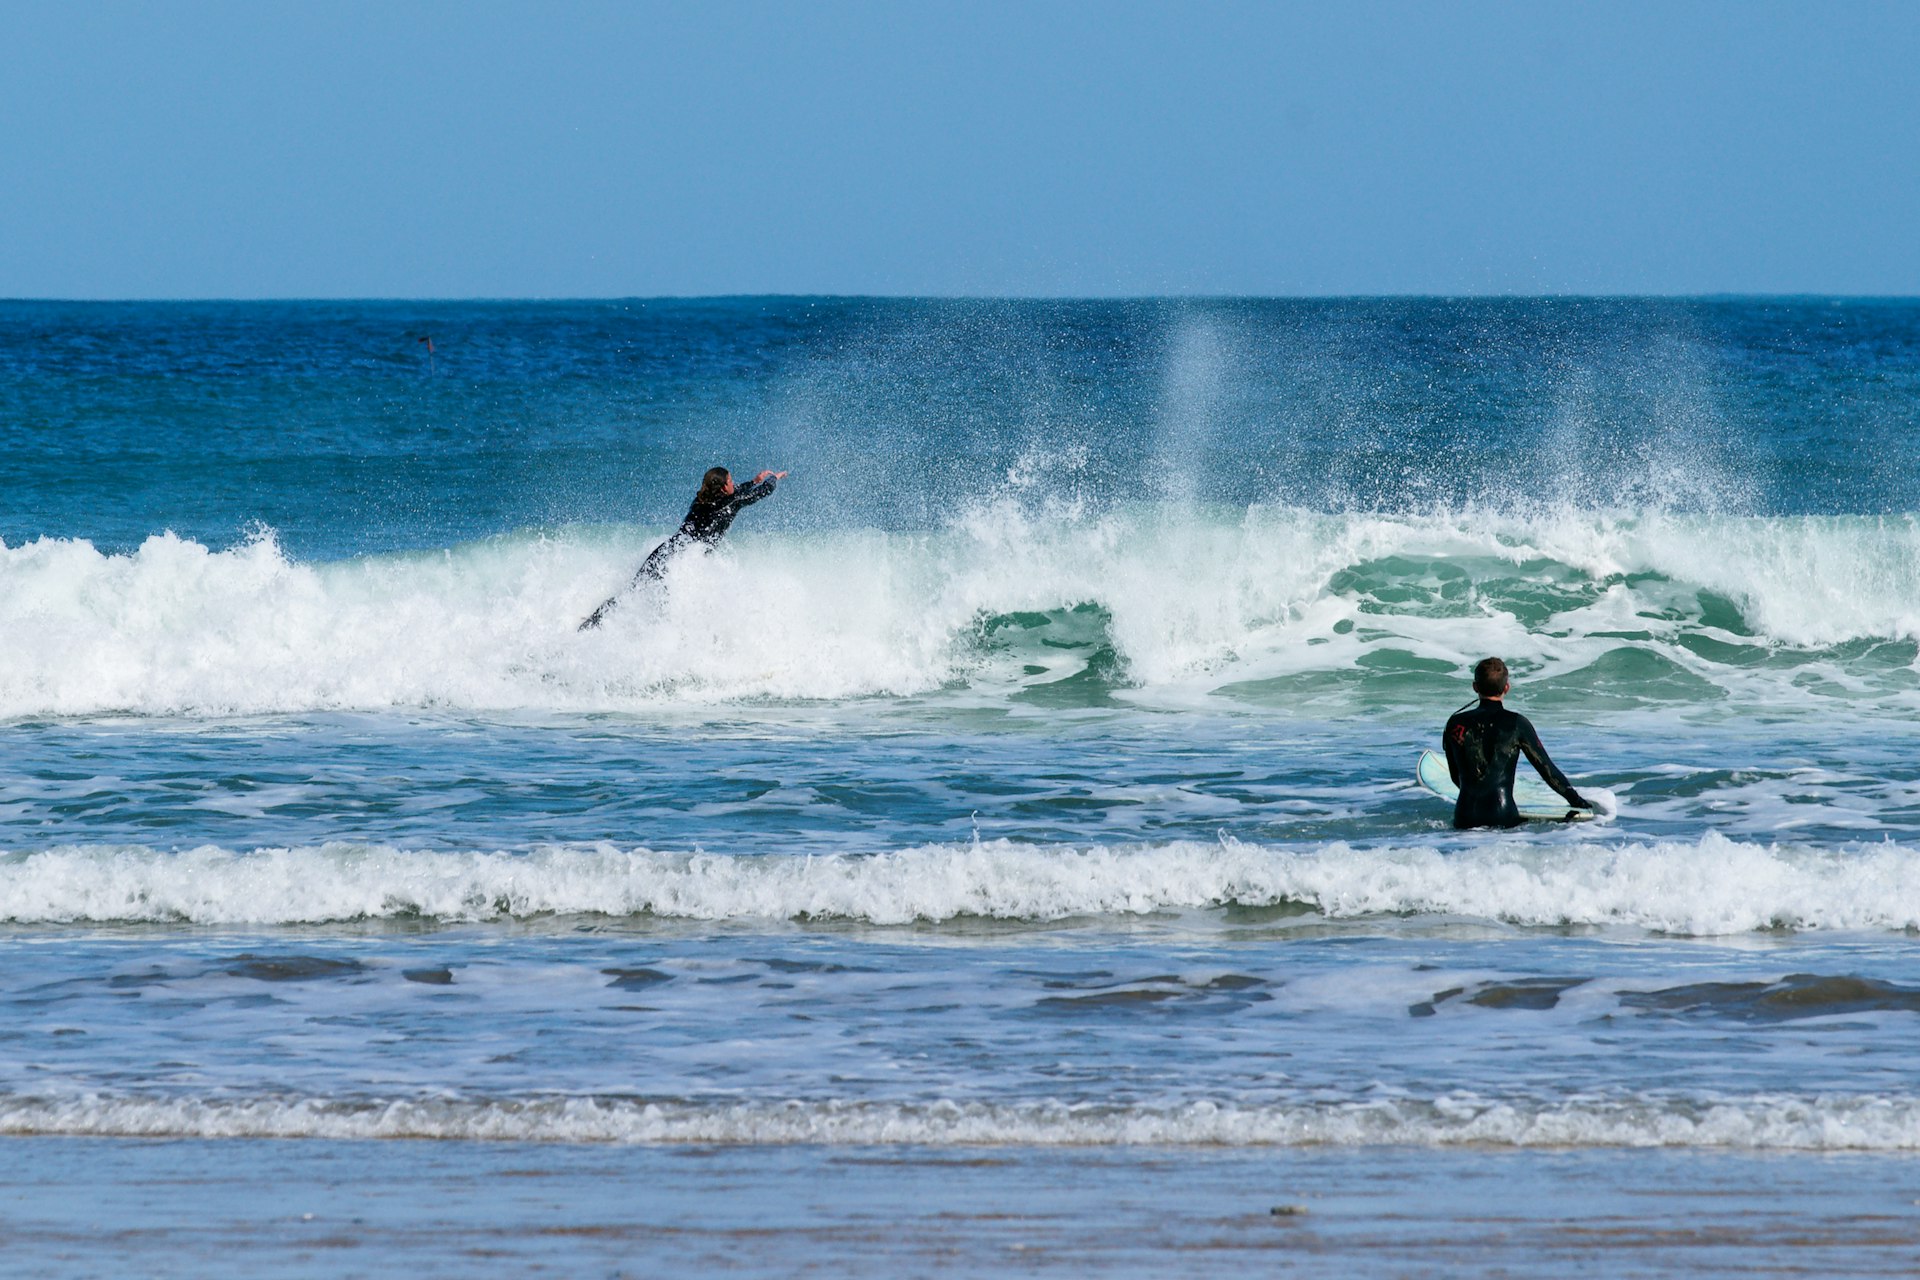 Surfing at Newquay beach in Cornwall